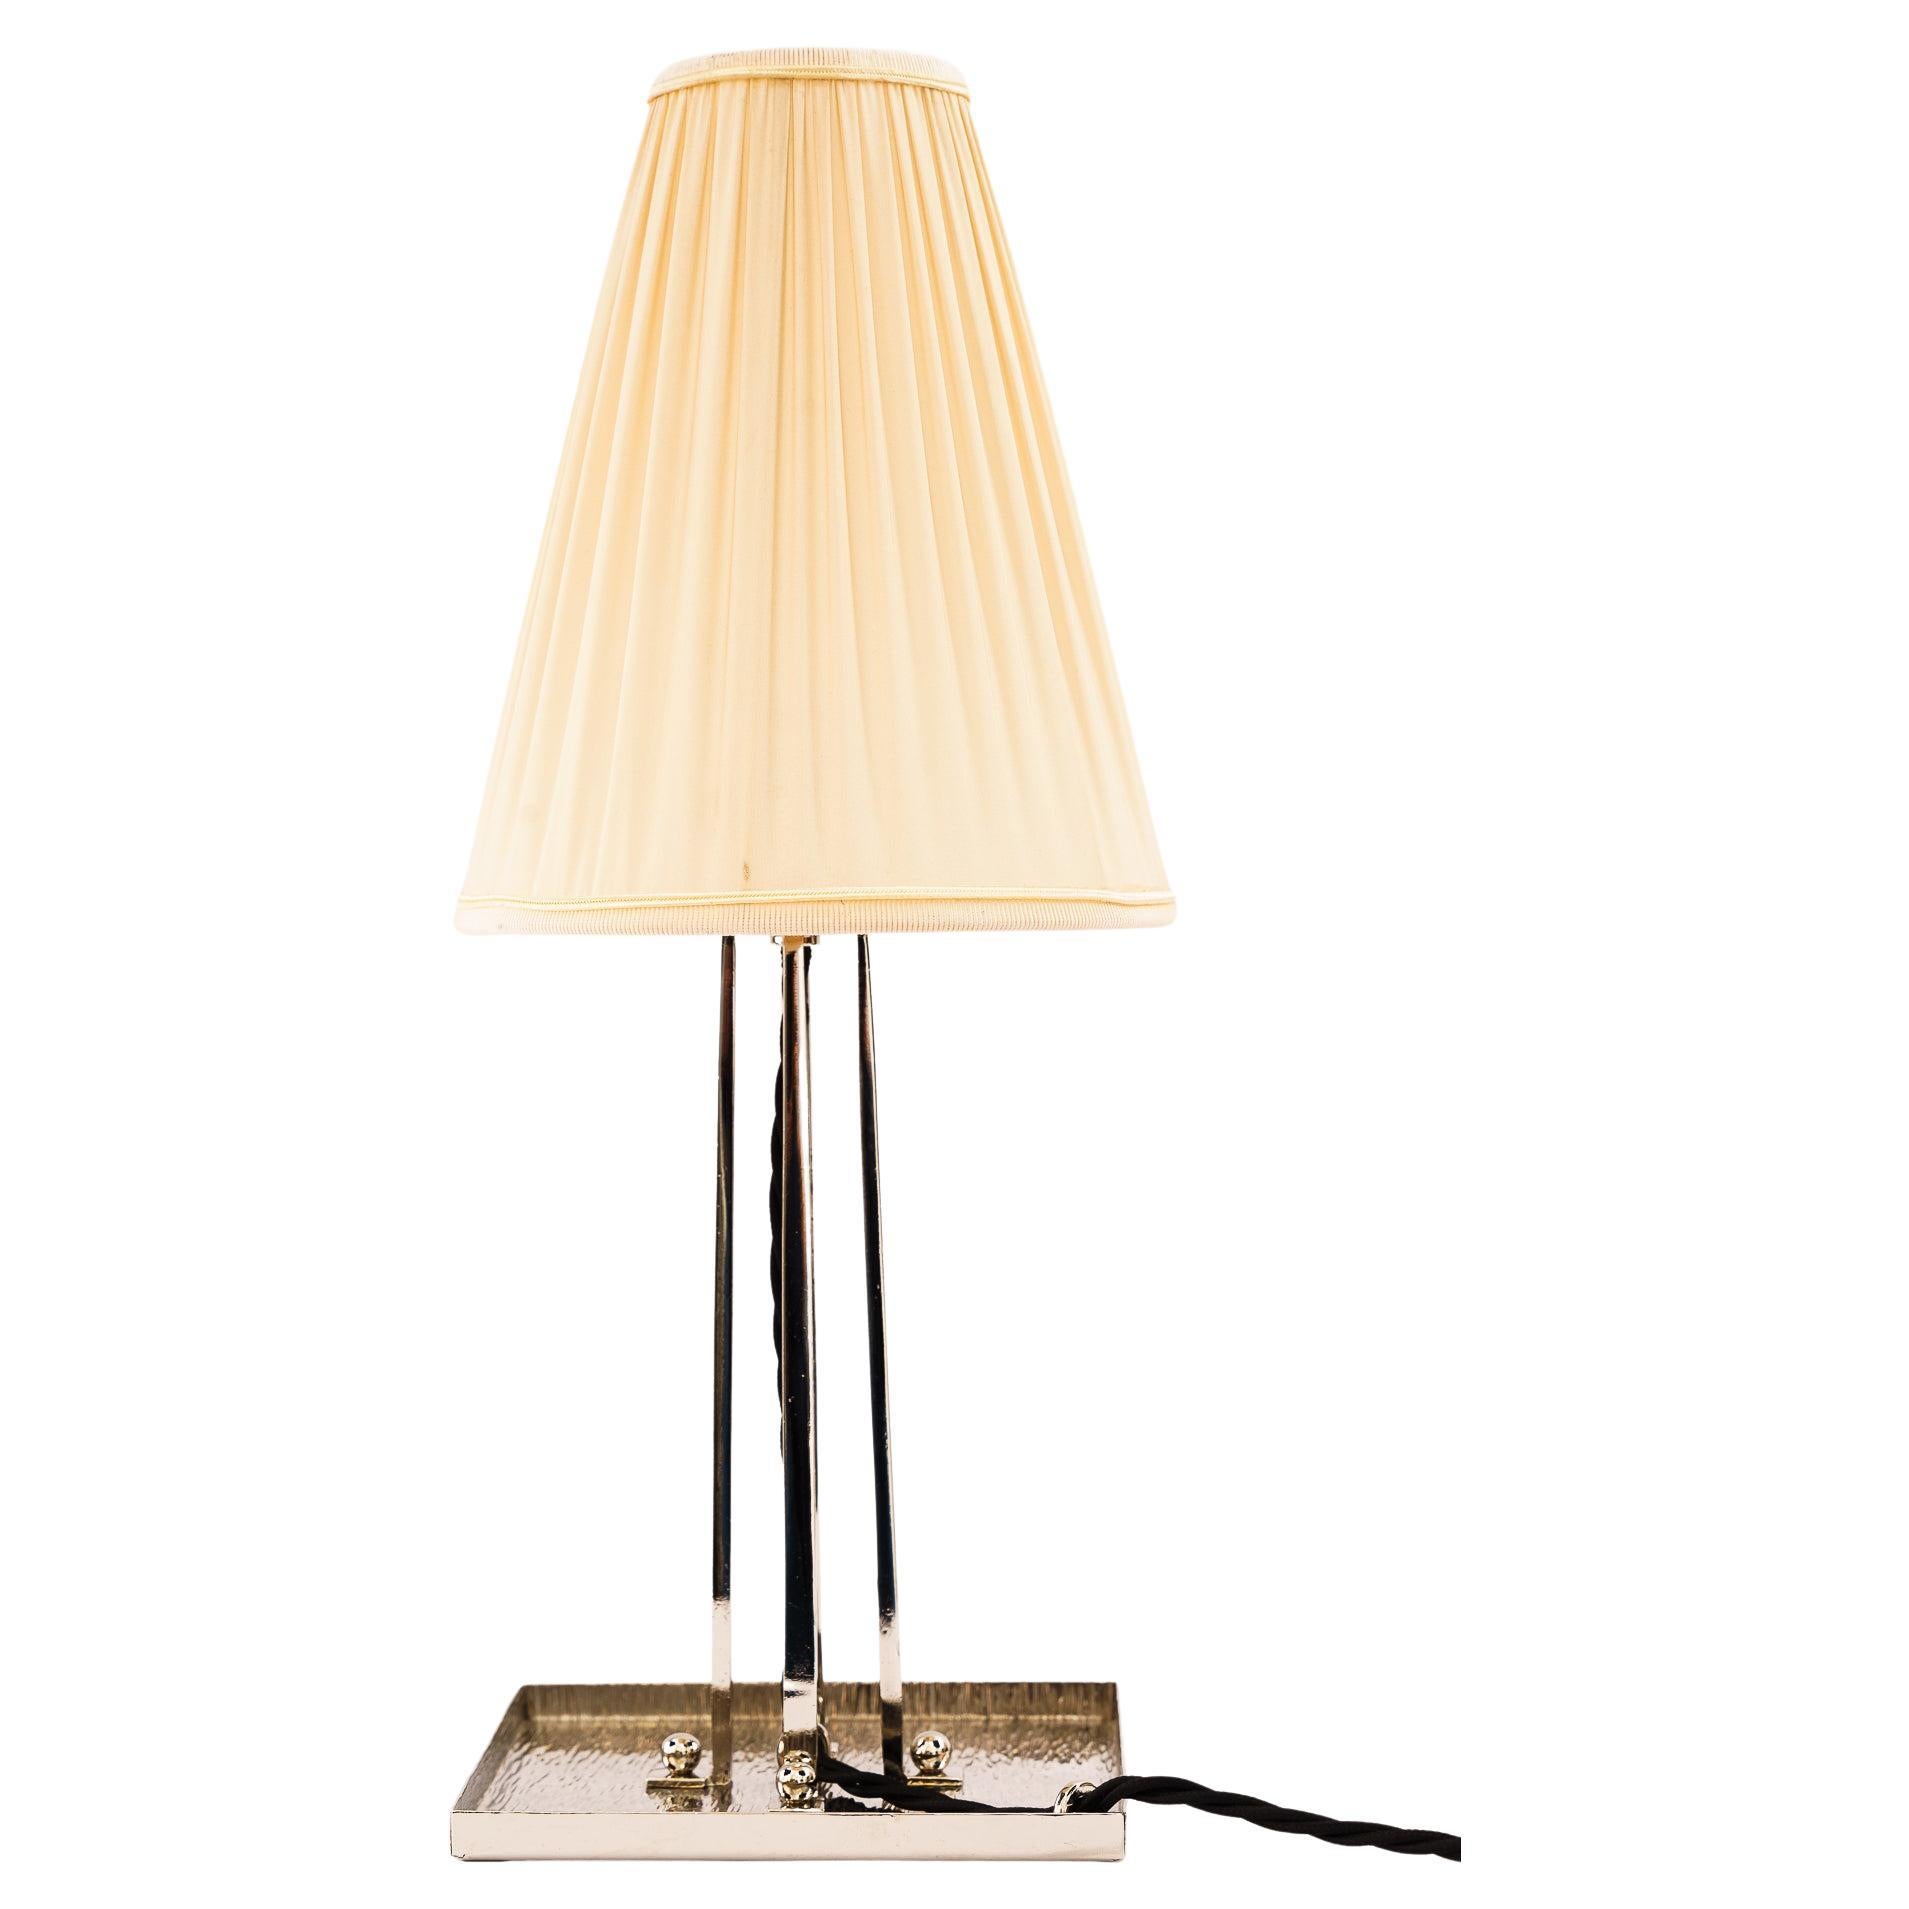 Art Deco nickel - plated table lamp with fabric shade around 1920s